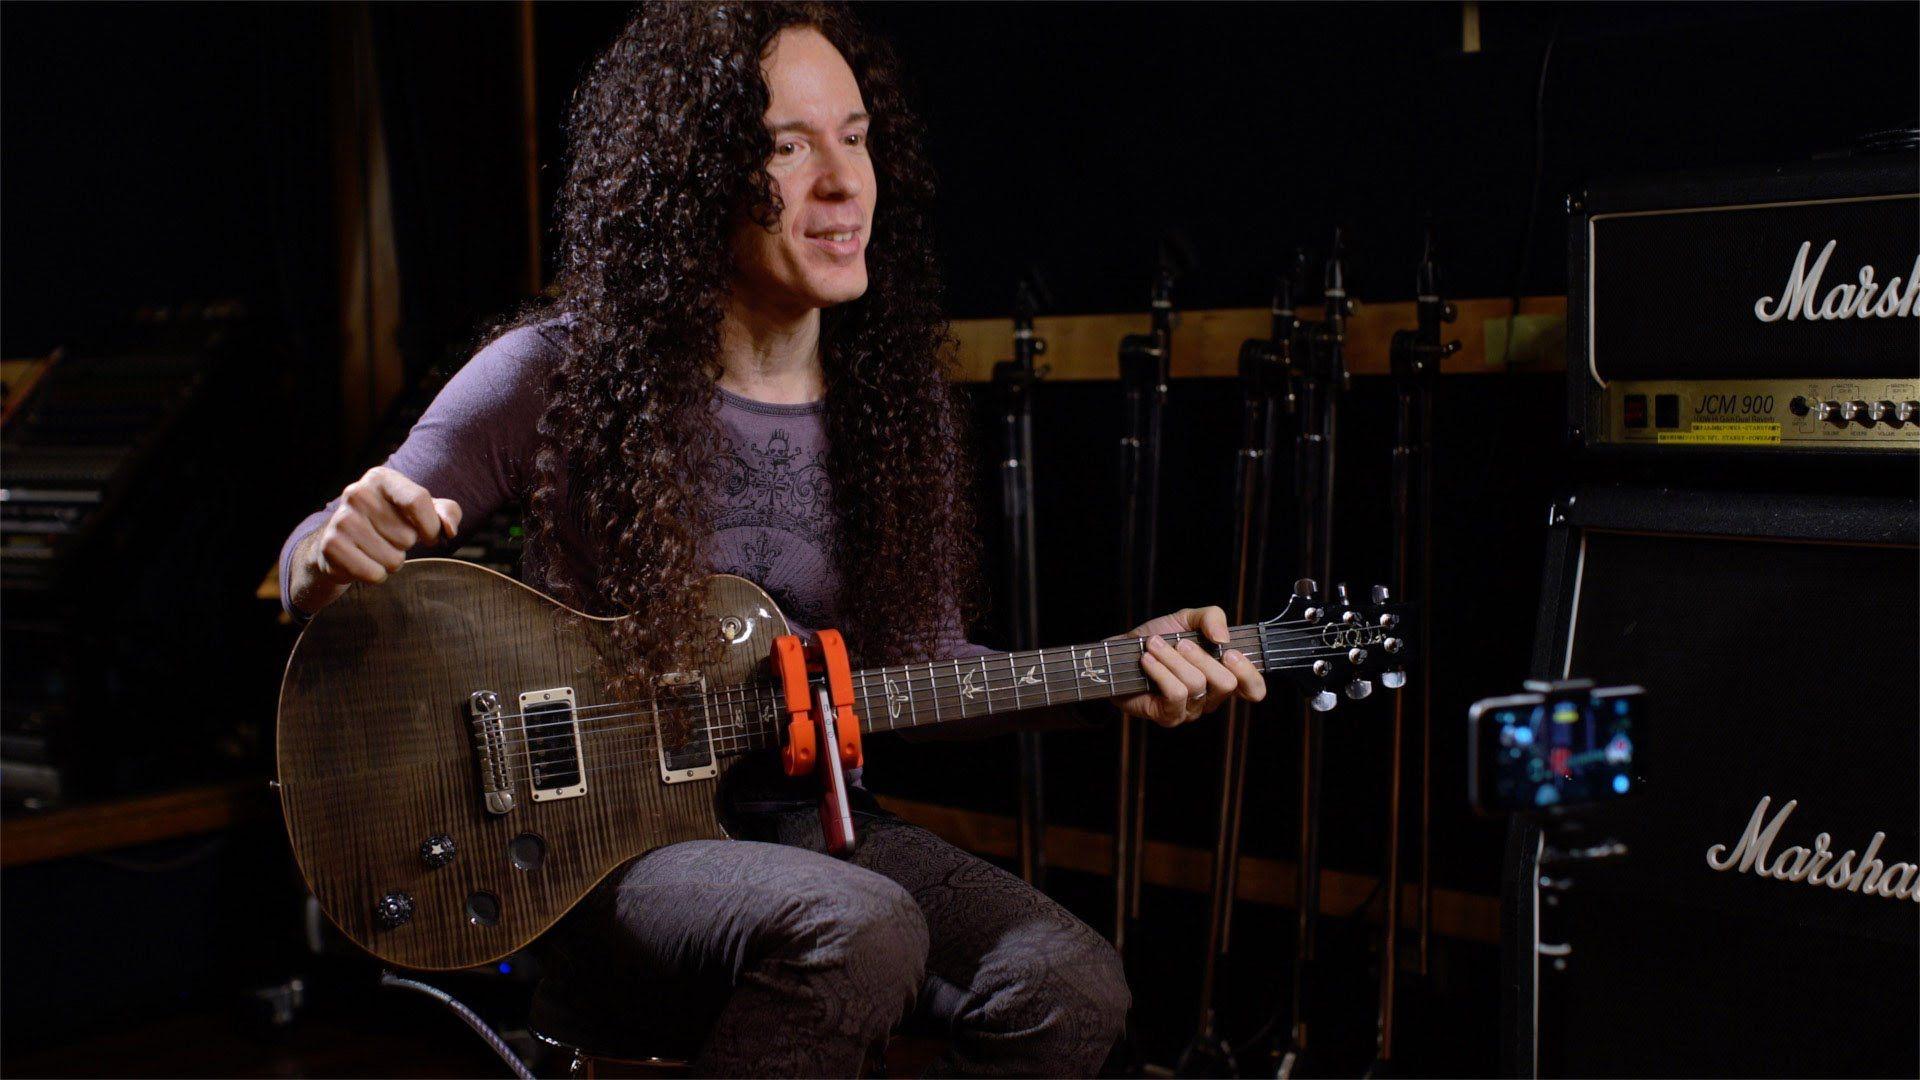 Marty Friedman on Songwriting, Cacophony, and Jason Becker